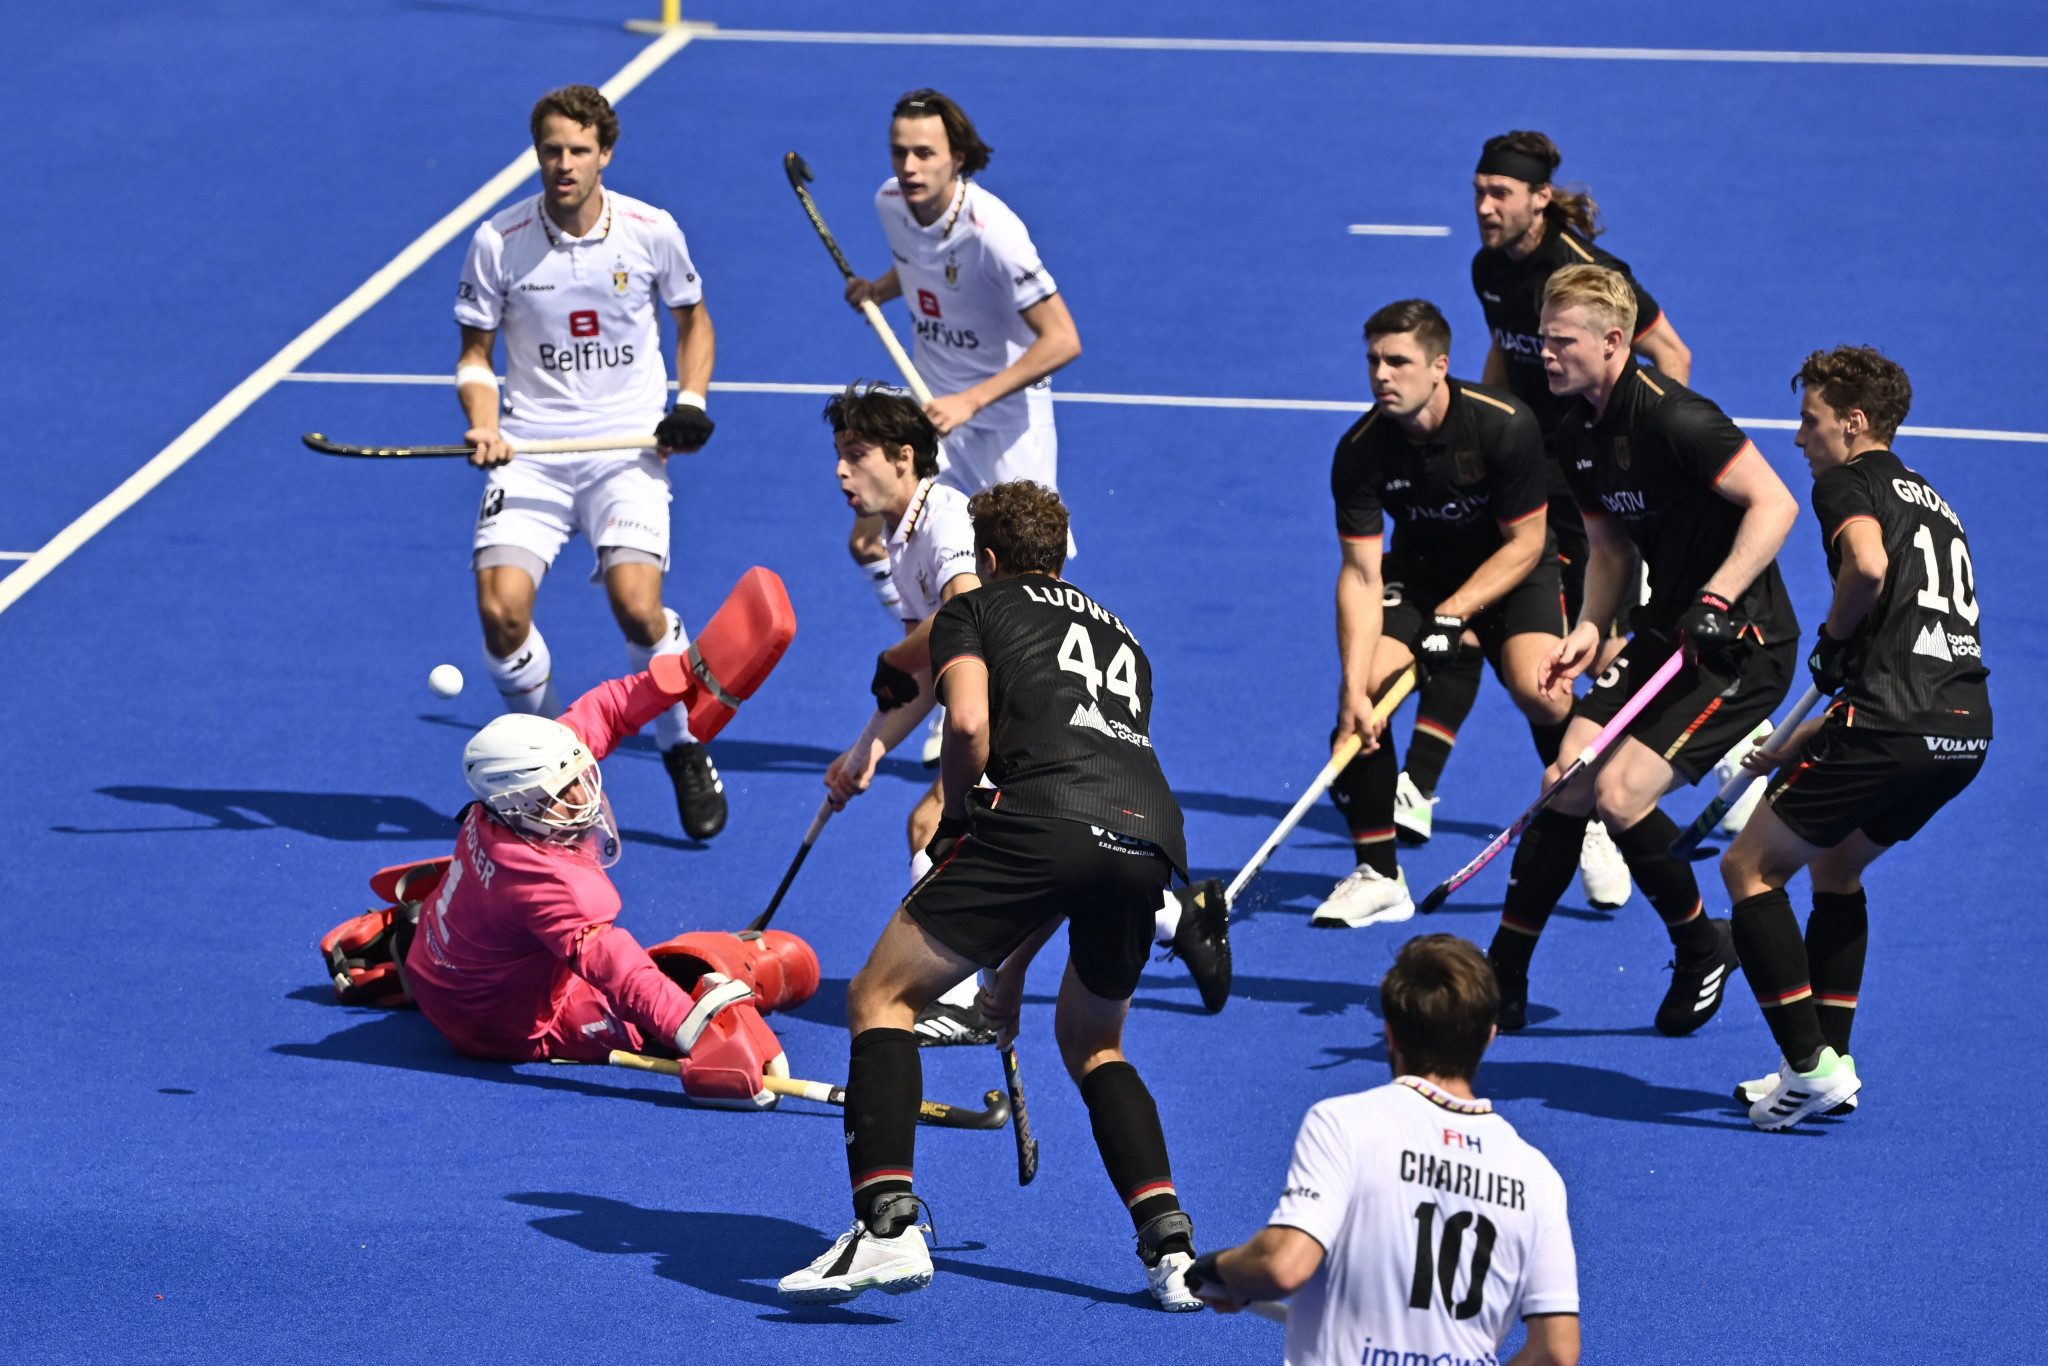 Belgium, playing in white, won bronze at the men's European Hockey Championships after defeating hosts Germany ©Getty Images